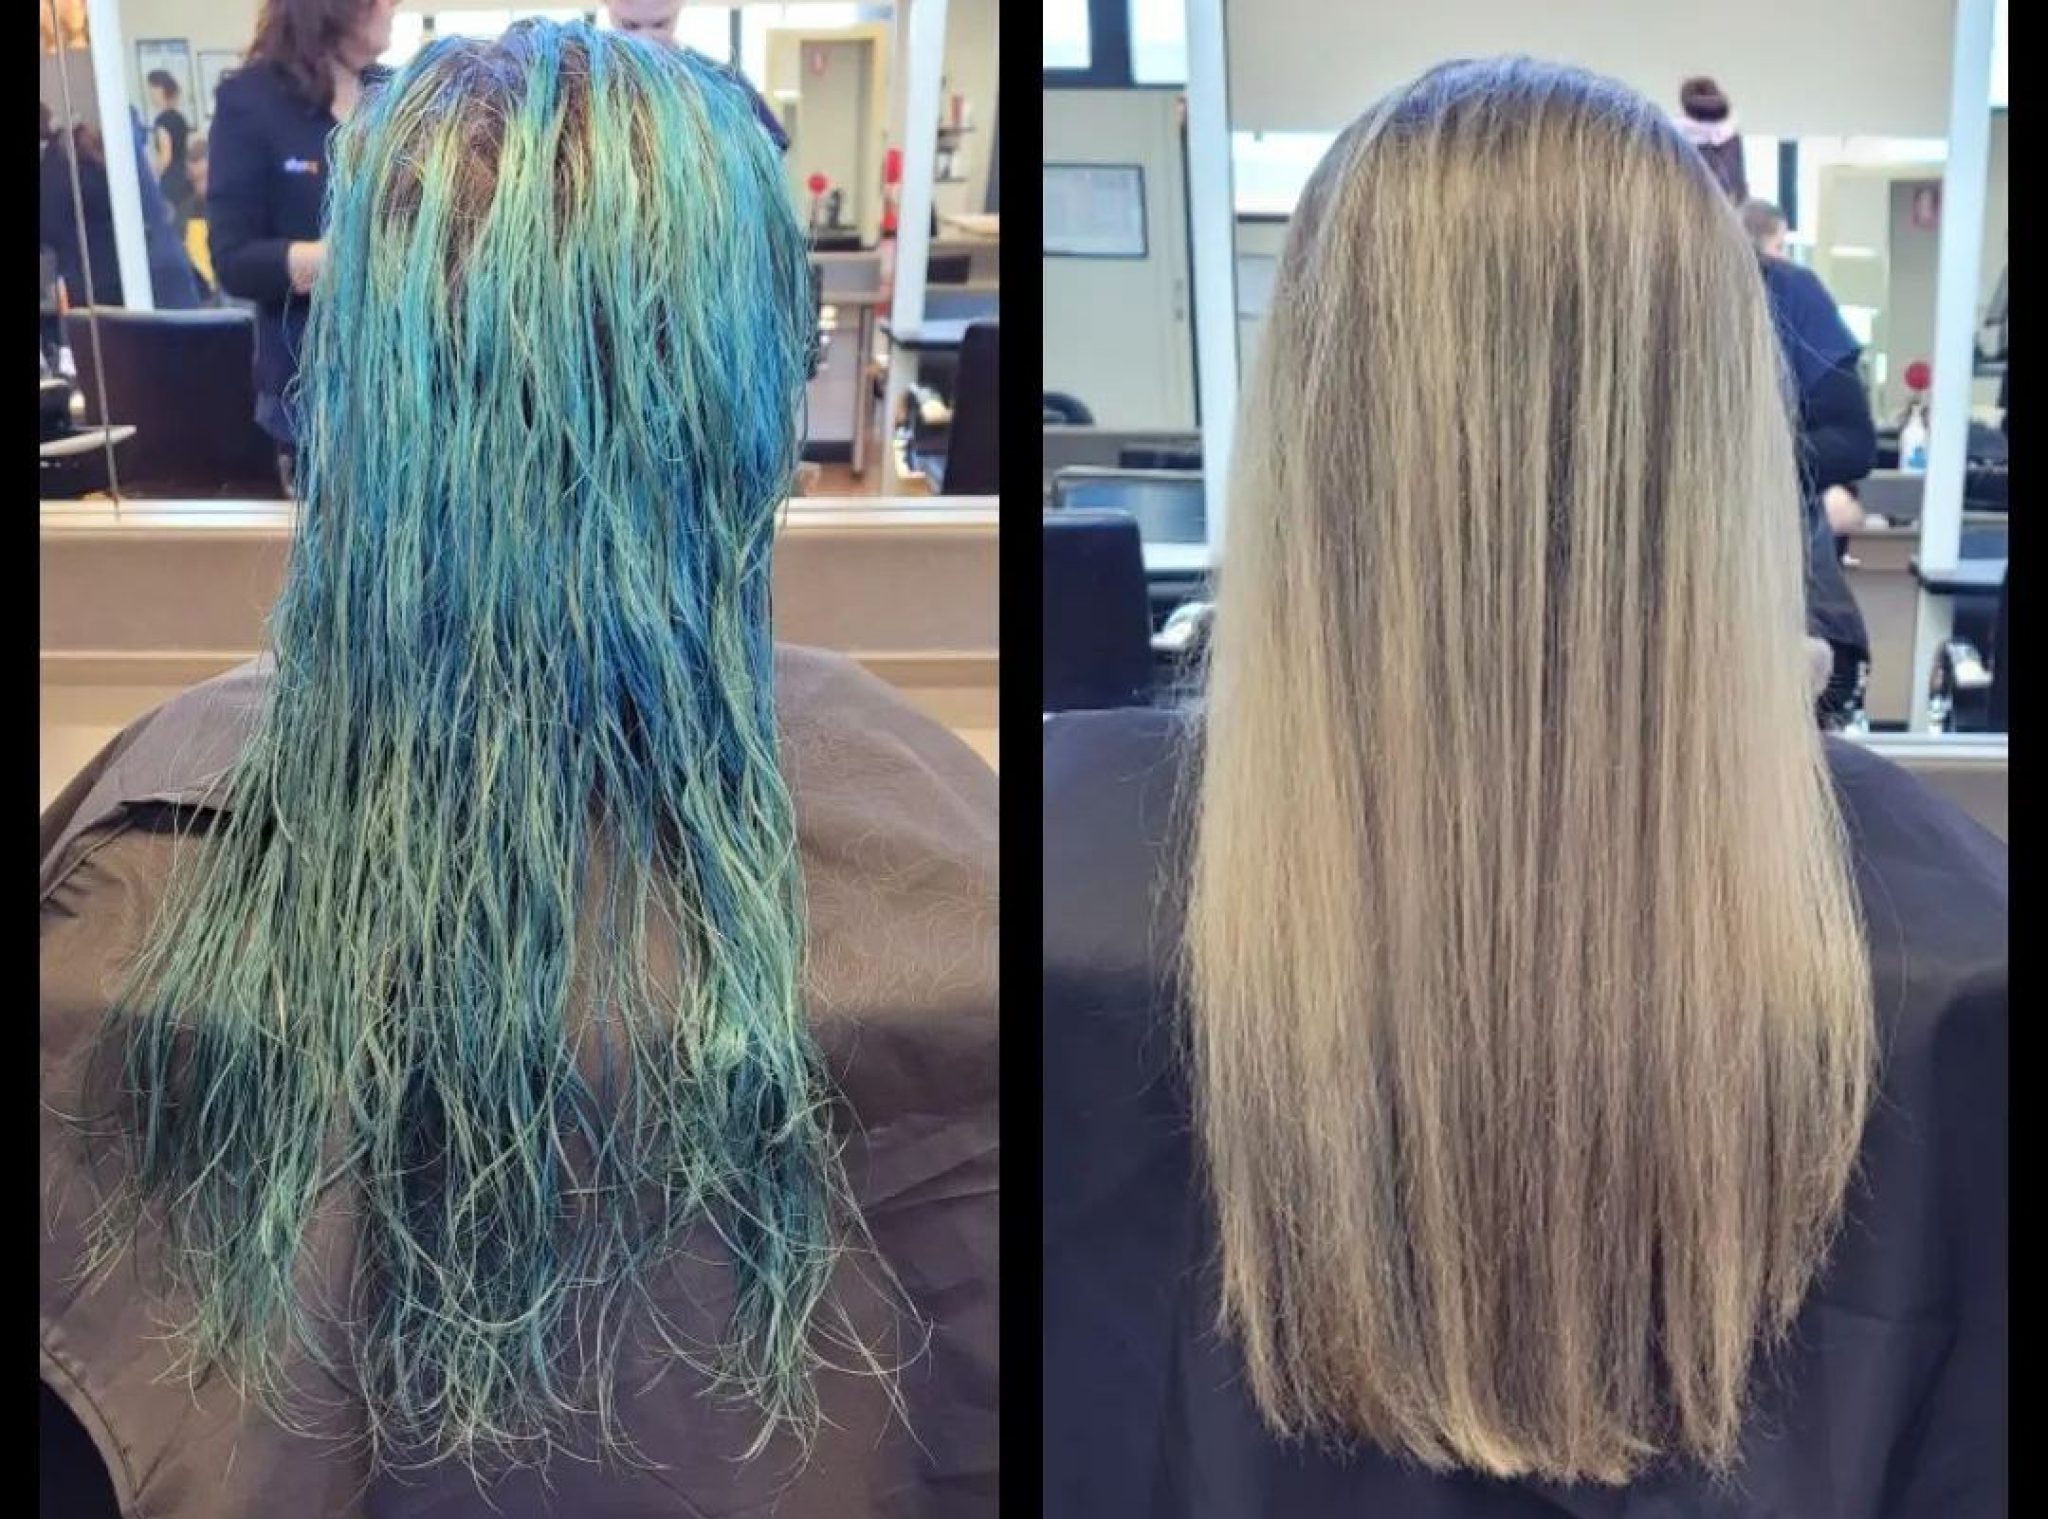 How to Remove Blue Hair Dye - wide 9